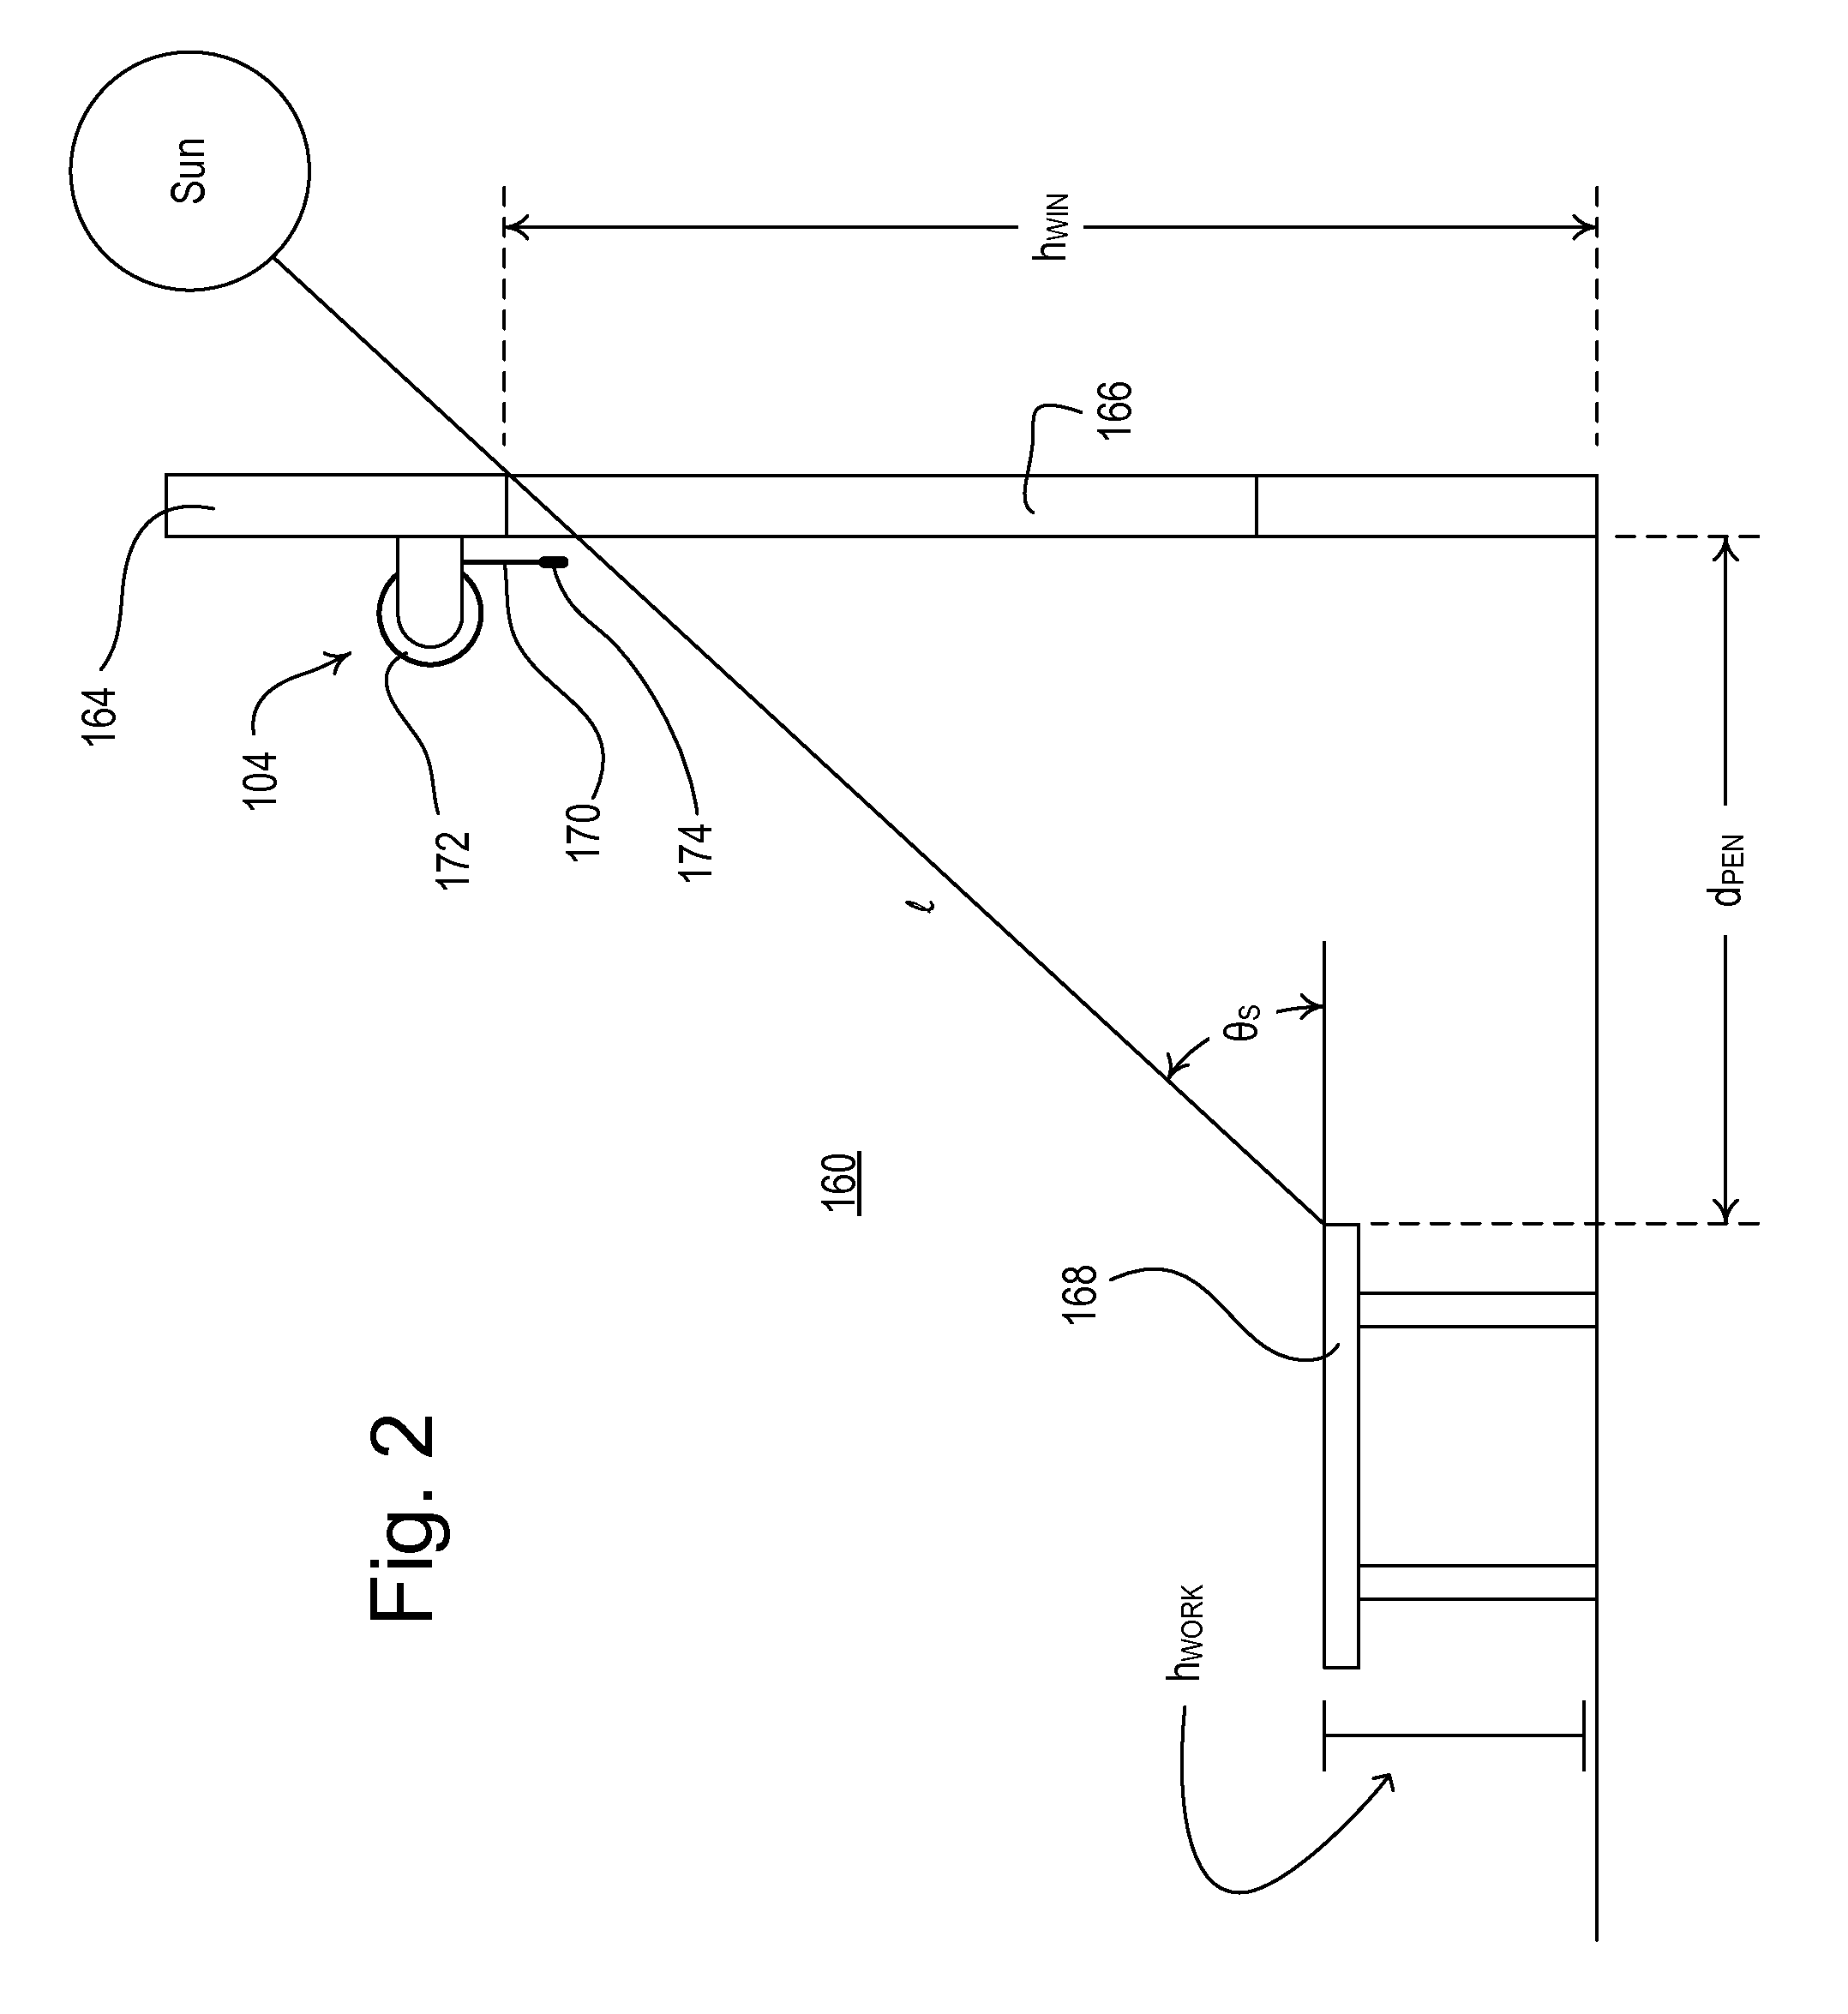 Method of Automatically Controlling a Motorized Window Treatment While Minimizing Occupant Distractions